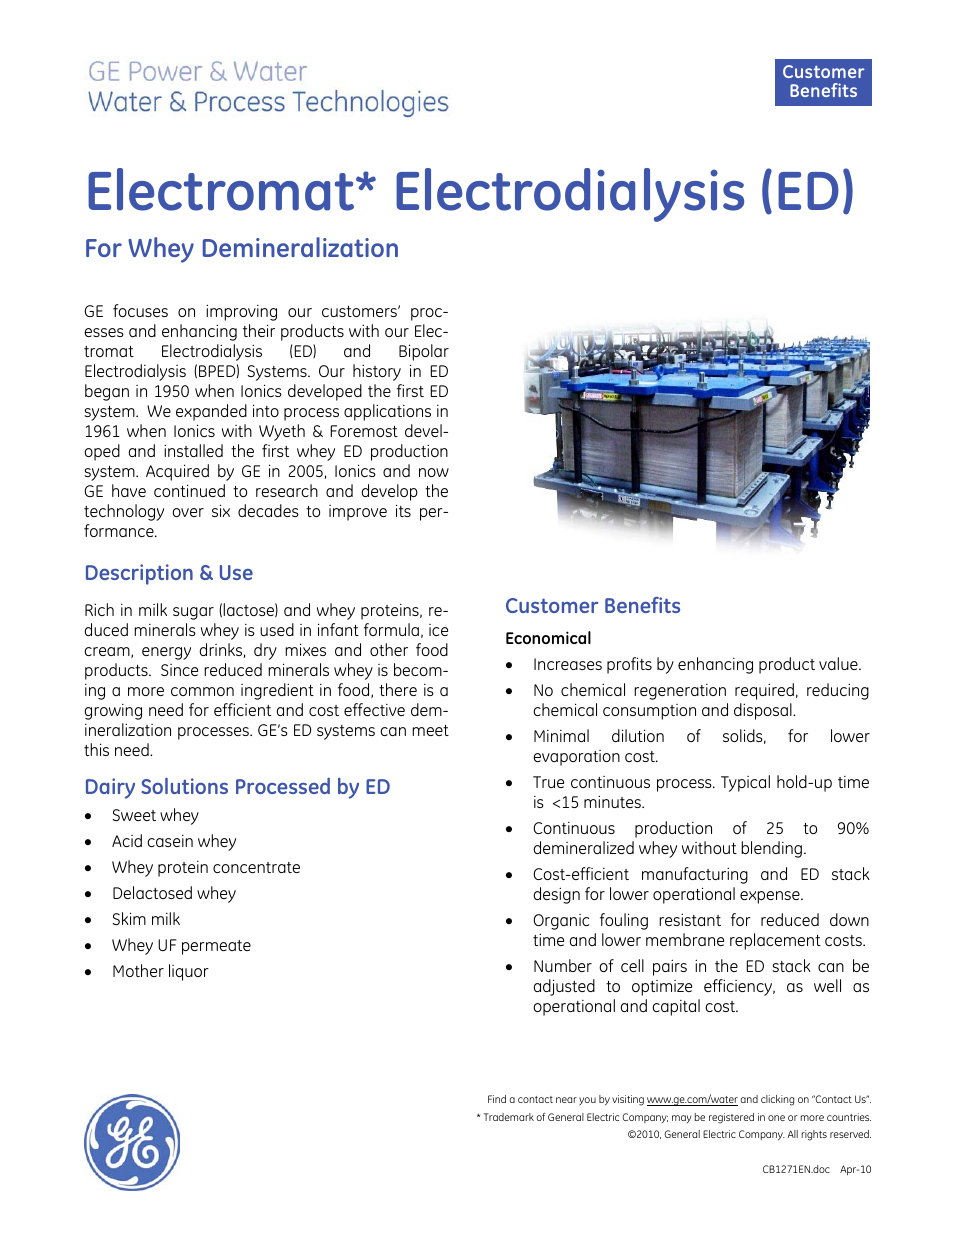 Electrodialysis (ED) for Whey Demineralization